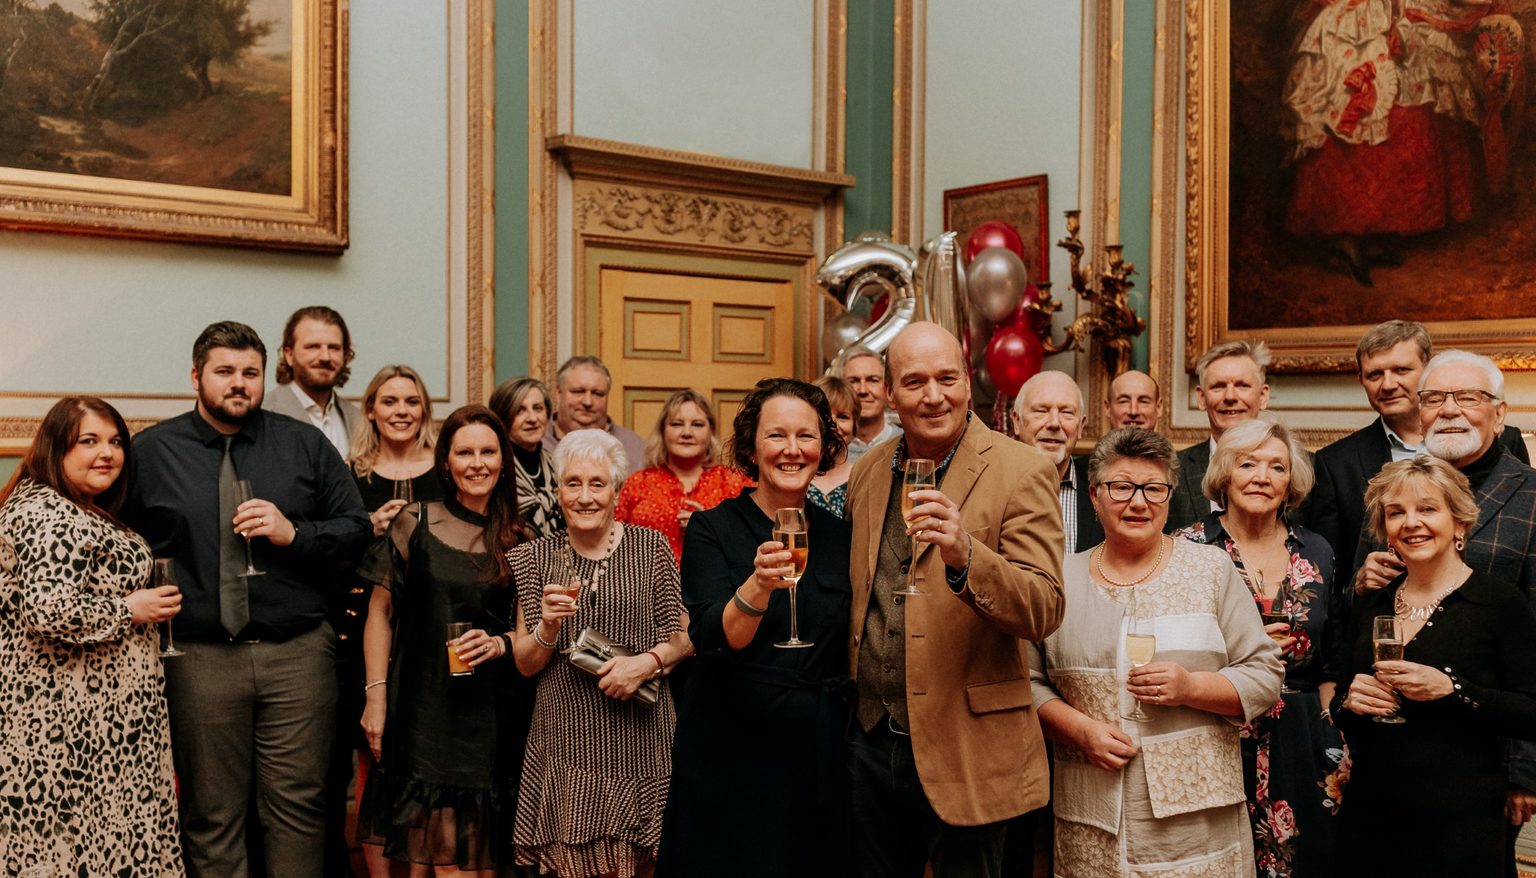 A group of people holding up glasses of champagne, with Mark and Felicity Cunliffe-Lister in front, during a charity event at Swinton Park Hotel